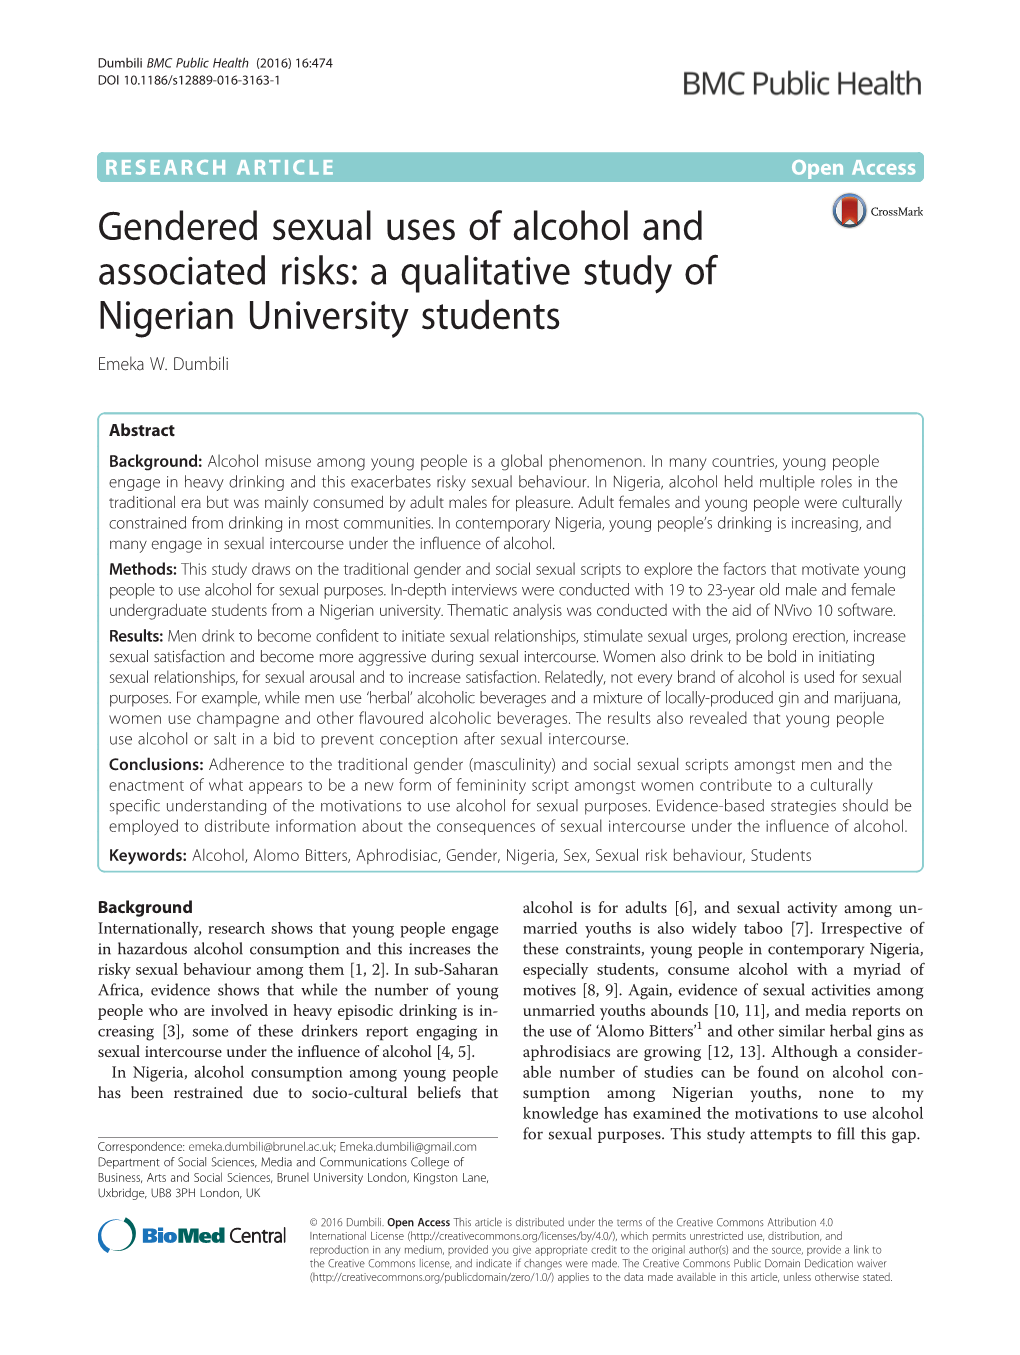 Gendered Sexual Uses of Alcohol and Associated Risks: a Qualitative Study of Nigerian University Students Emeka W